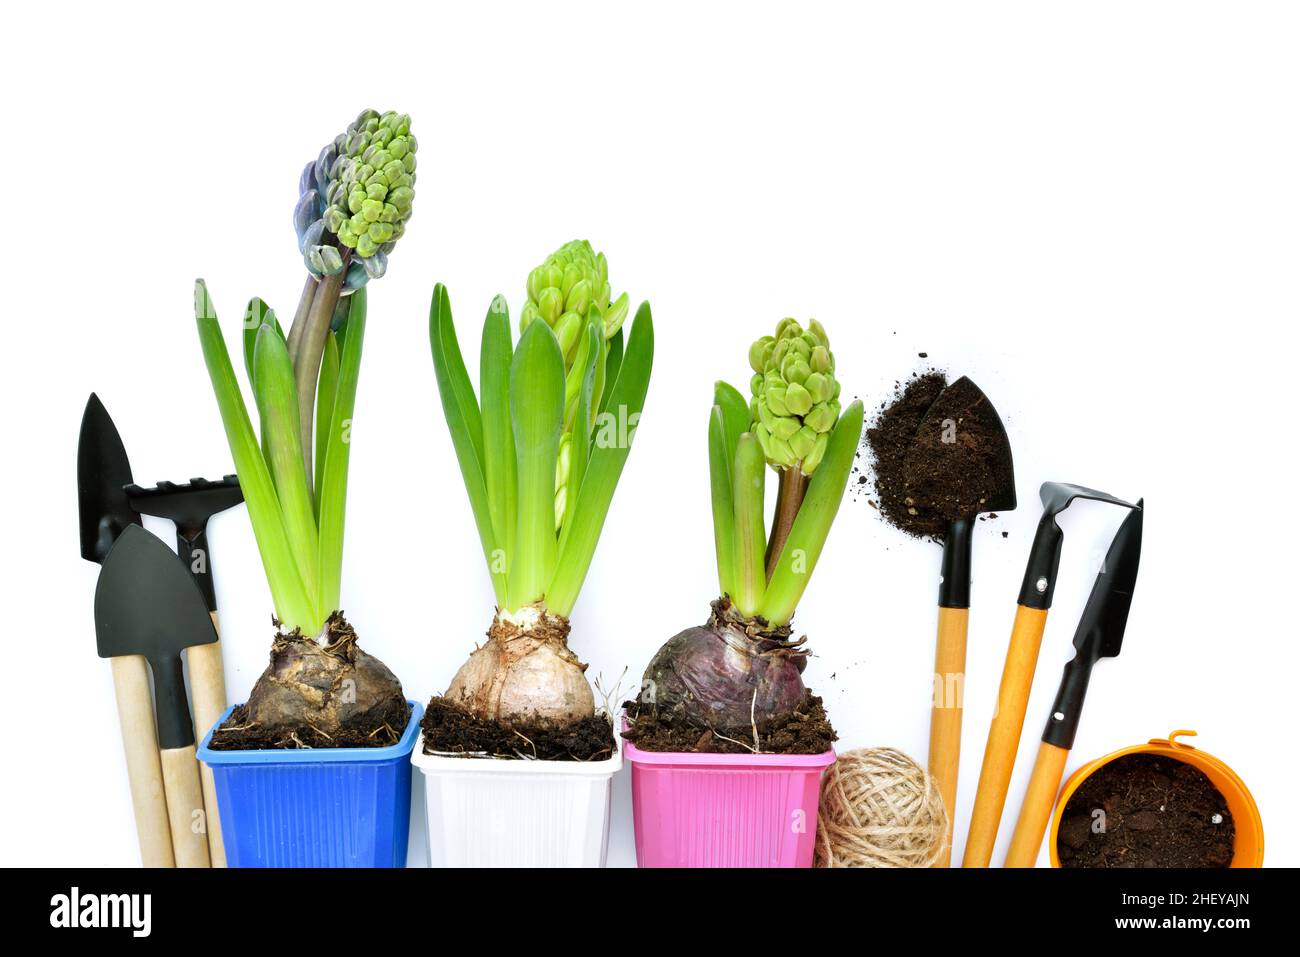 Spring hyacinth flowers and gardening tools on white background. Gardening concept. Top view Stock Photo